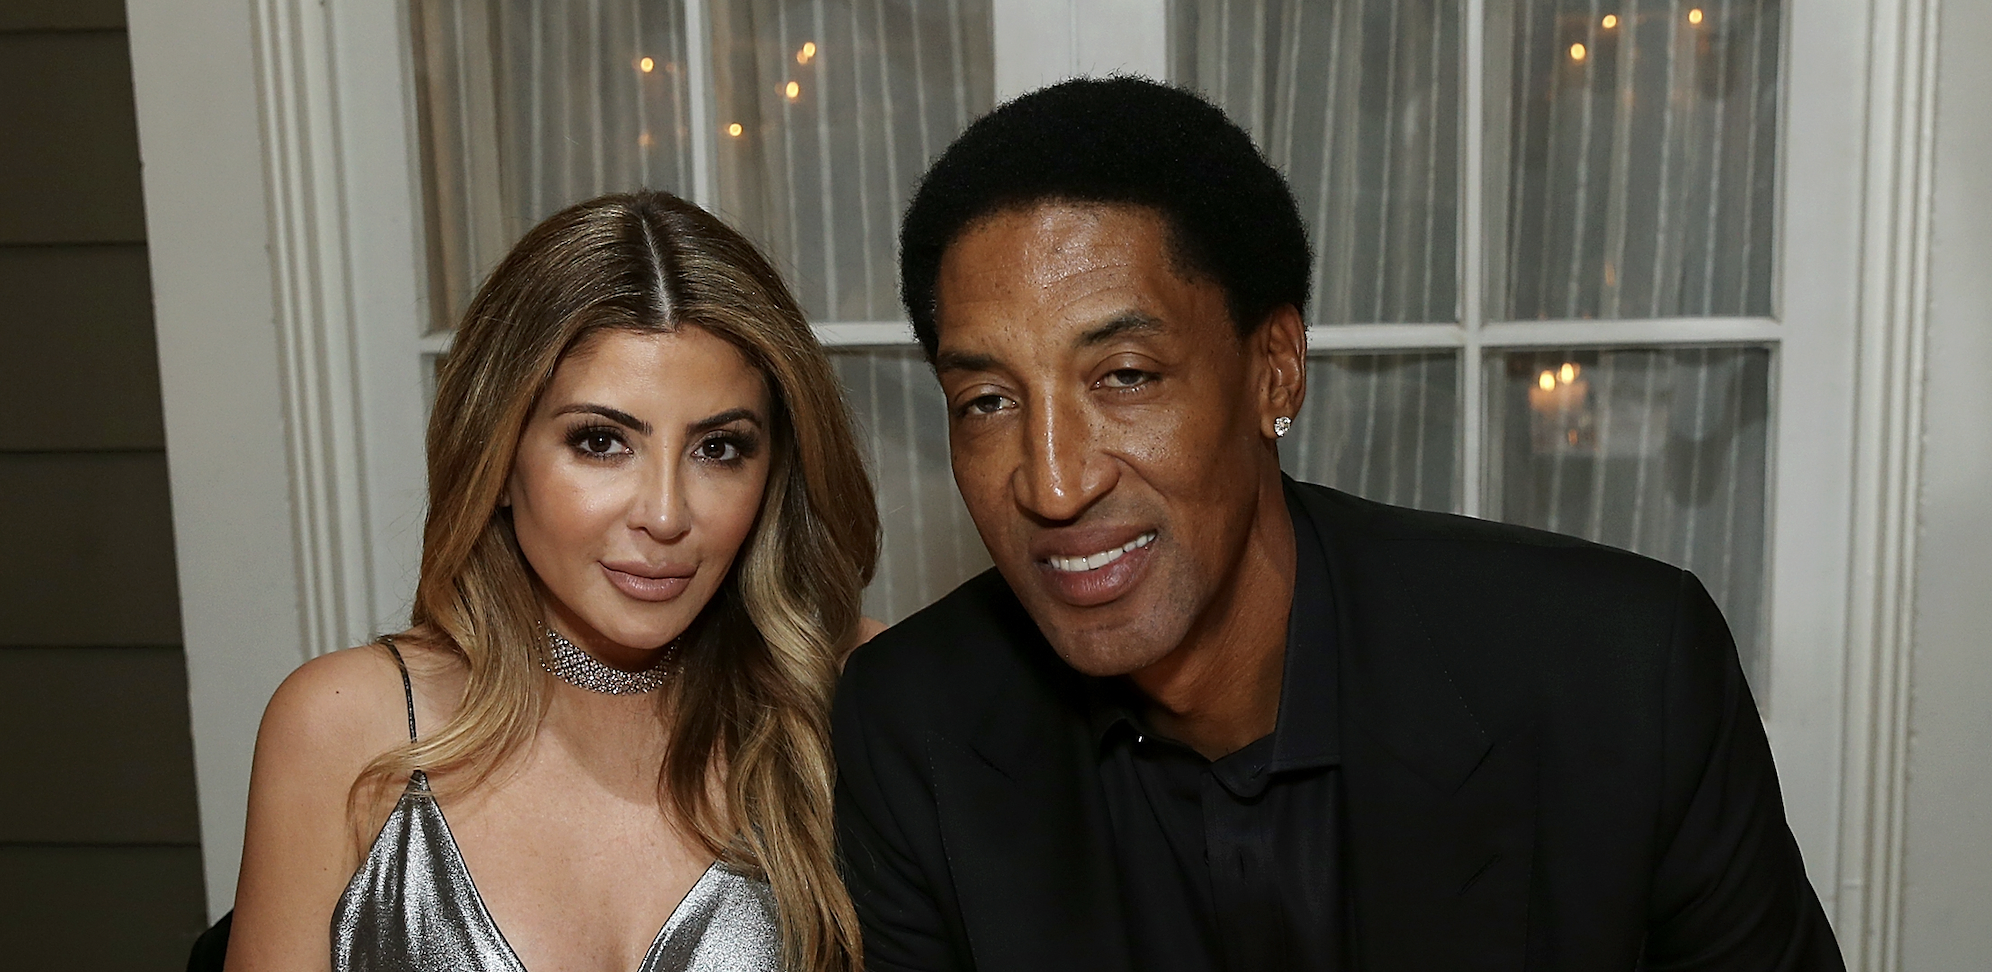 Larsa Pippen Claims She Had Sex Four Times A Night For 23 Years While Married To Scottie Pippen